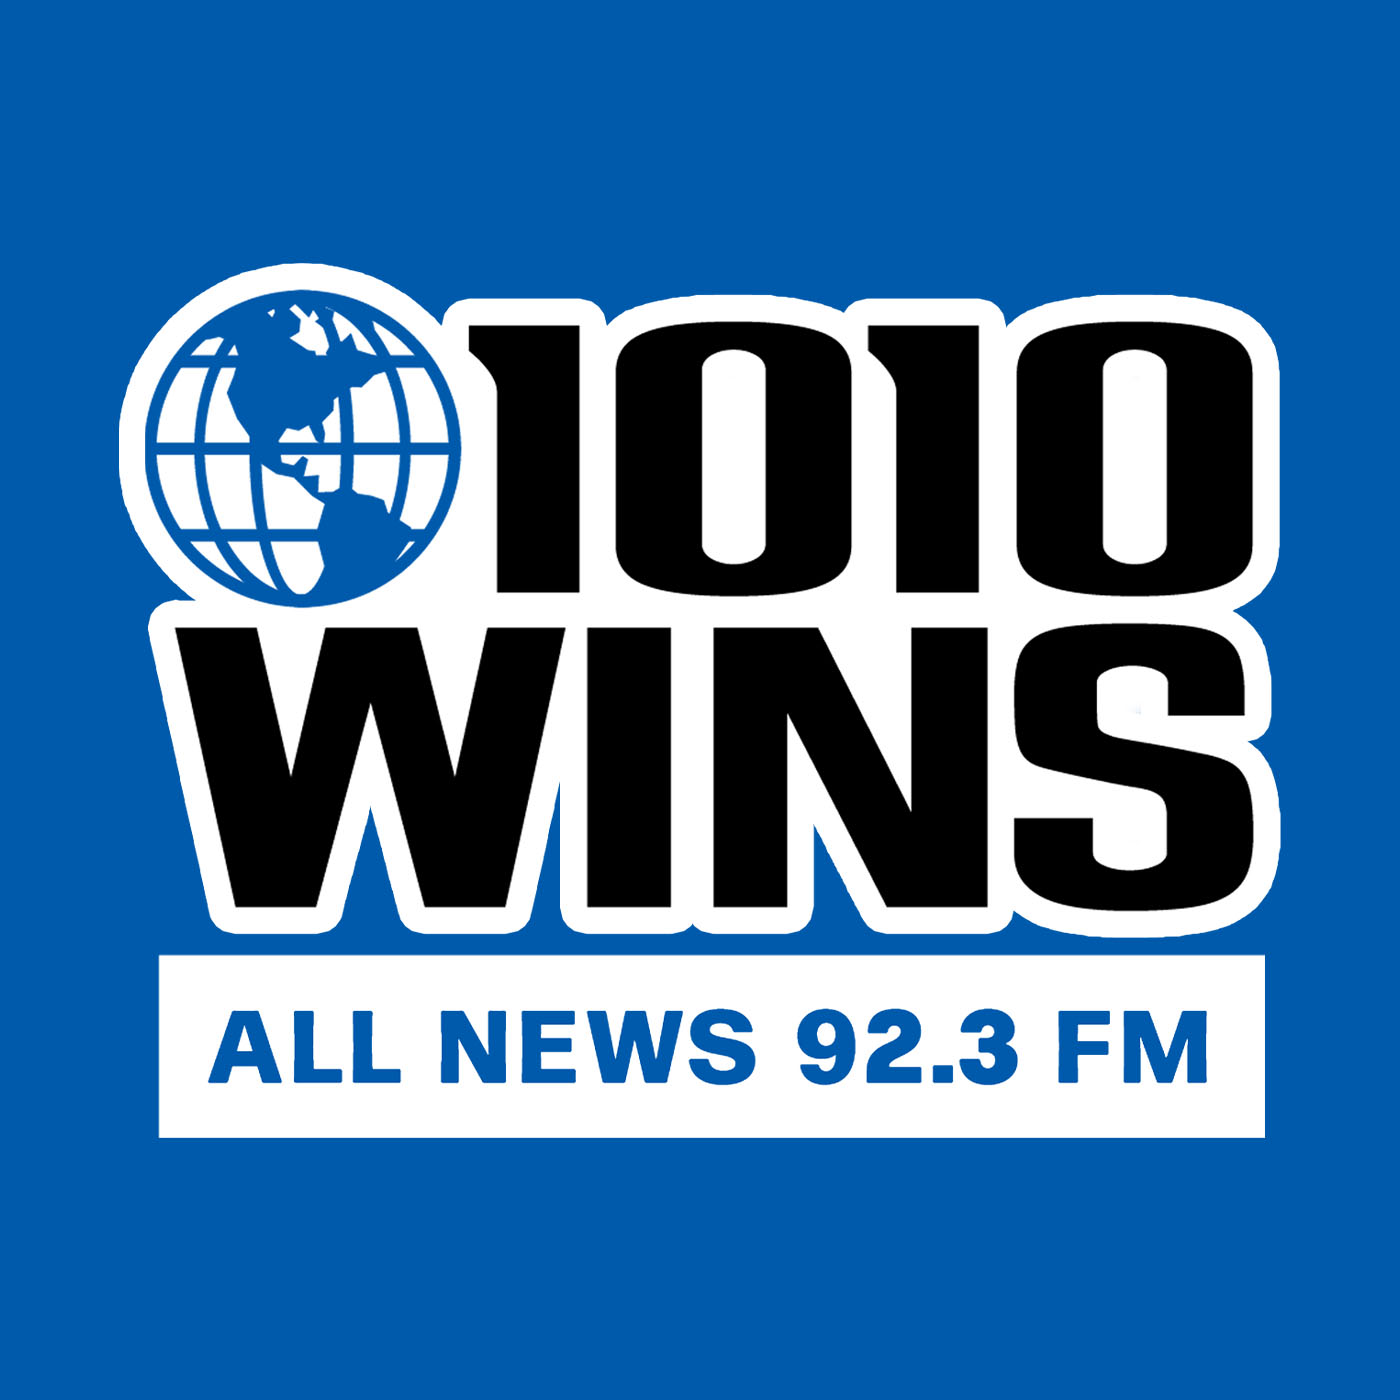 Gary Malin, C.O.O. of the Corcoran Group discusses how to deal with the rising rent in the city live on 1010WINS Newsline